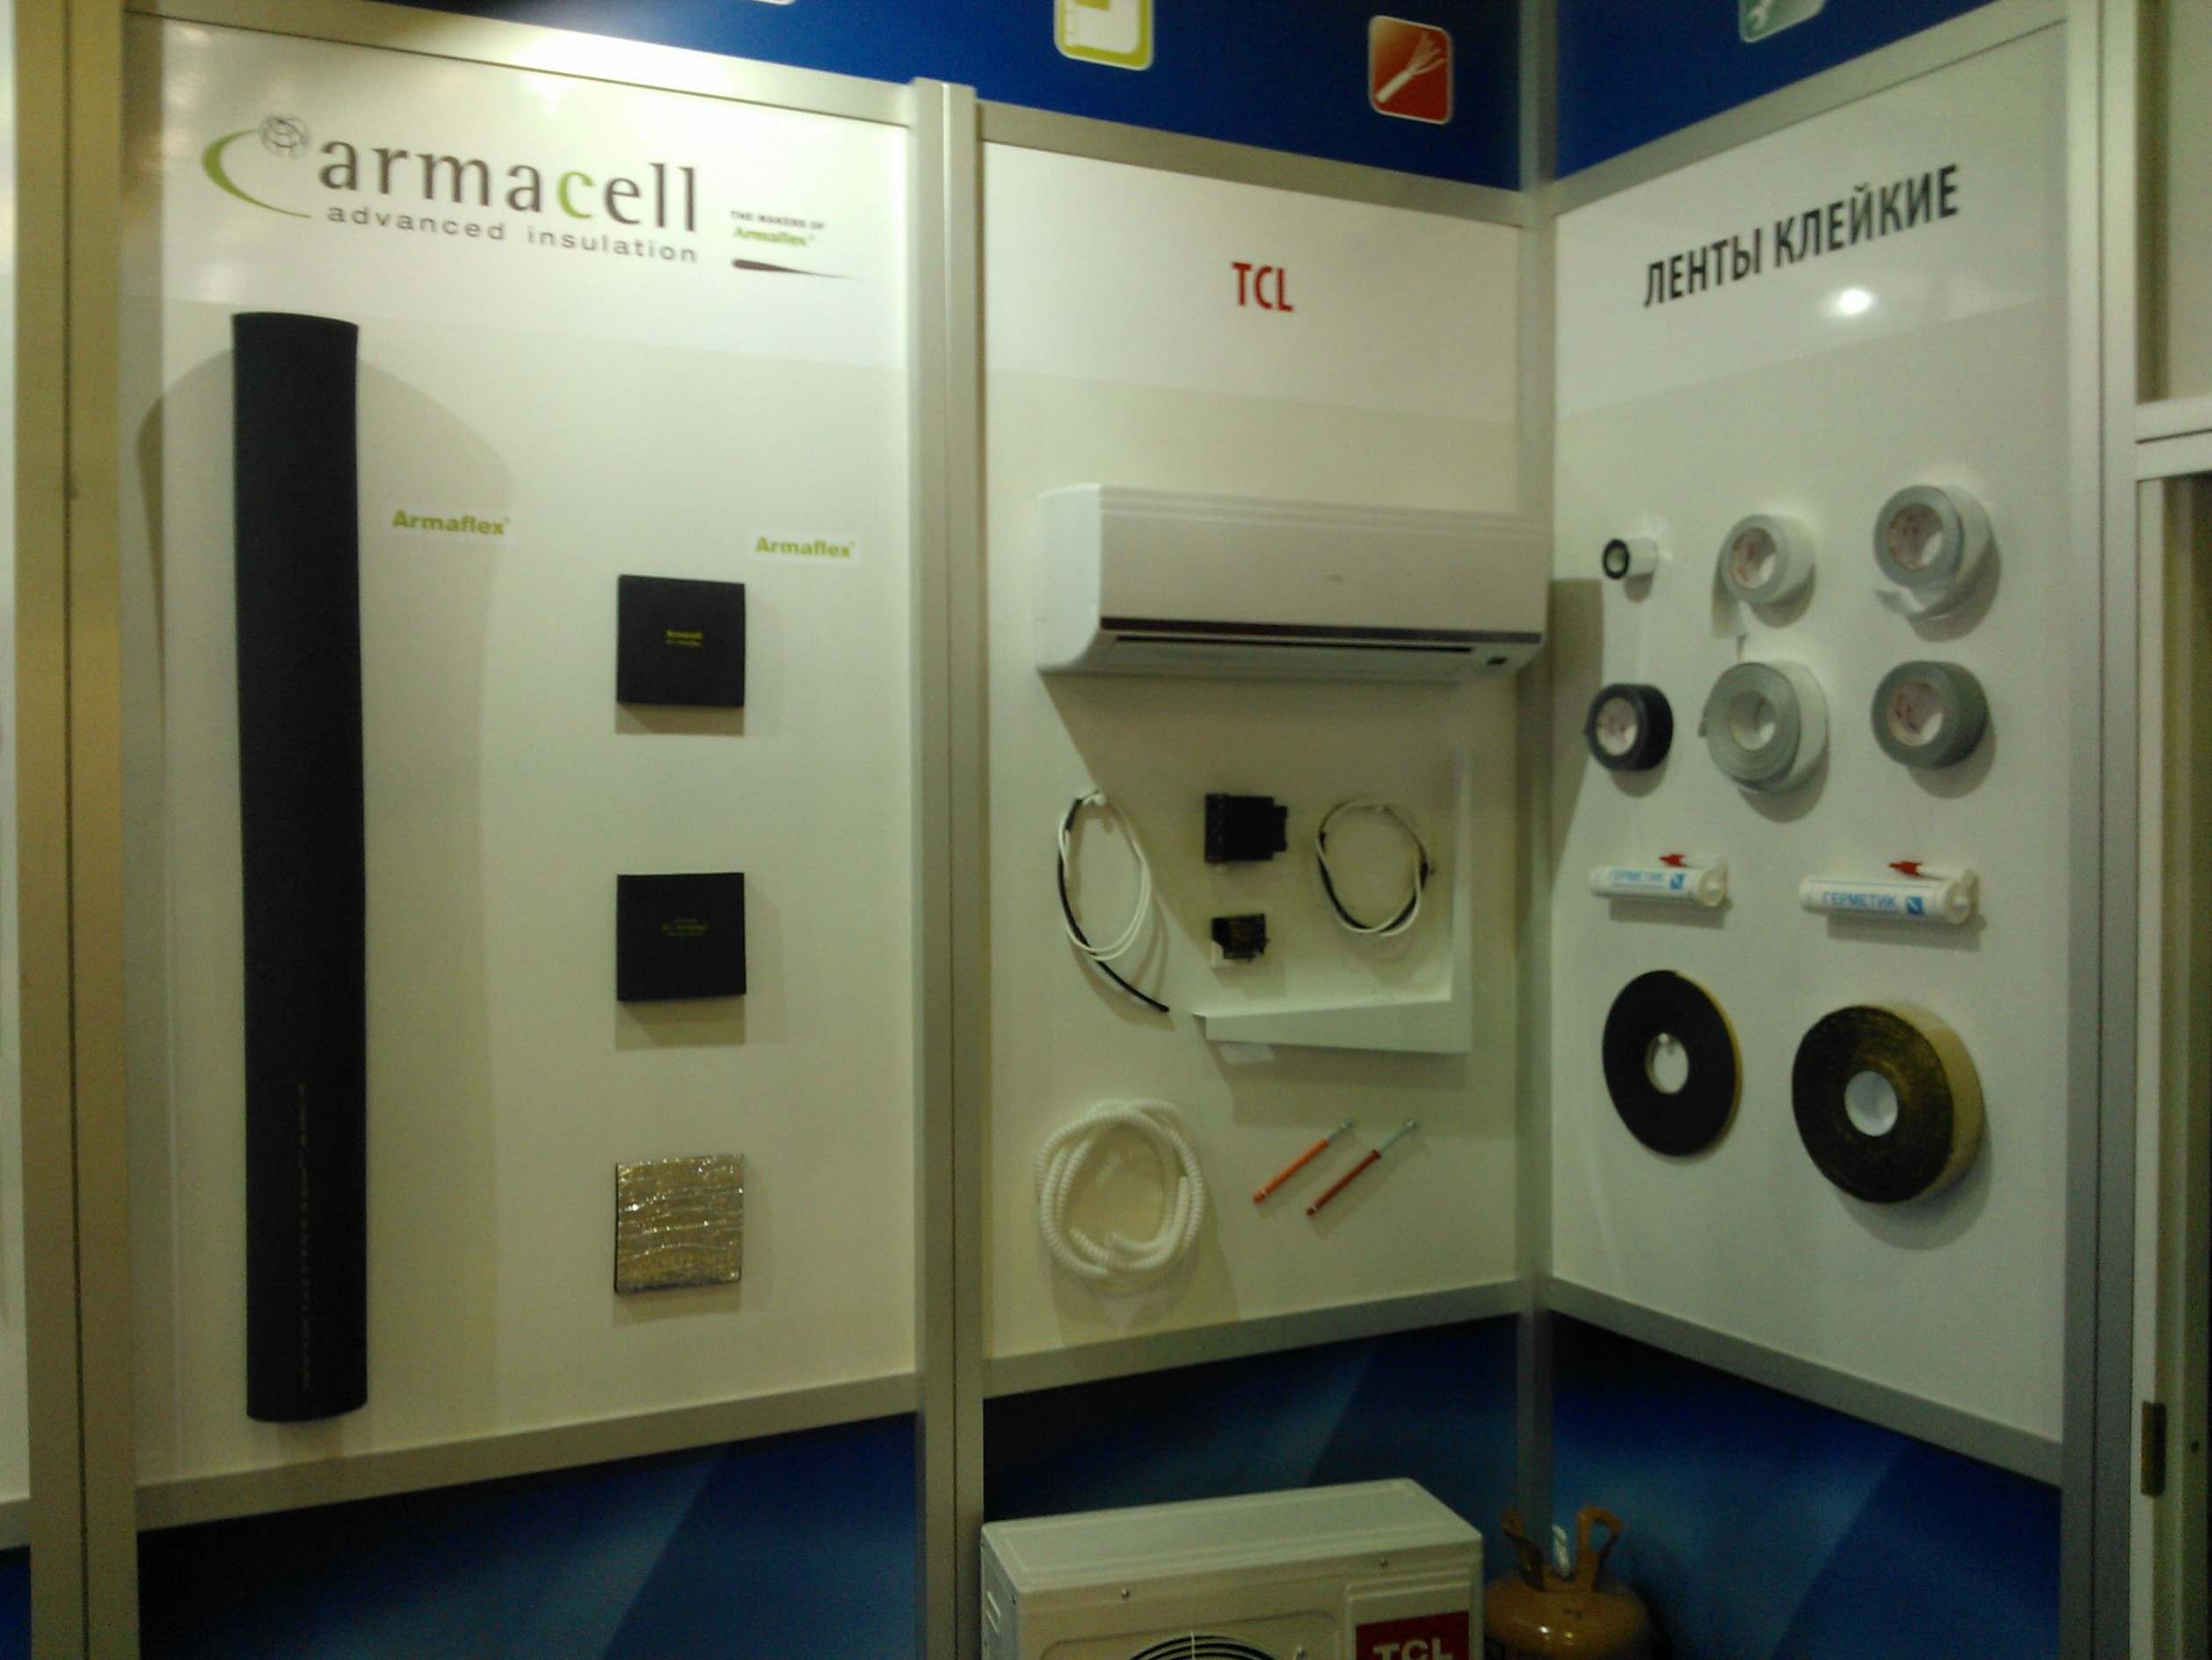  Armacell   